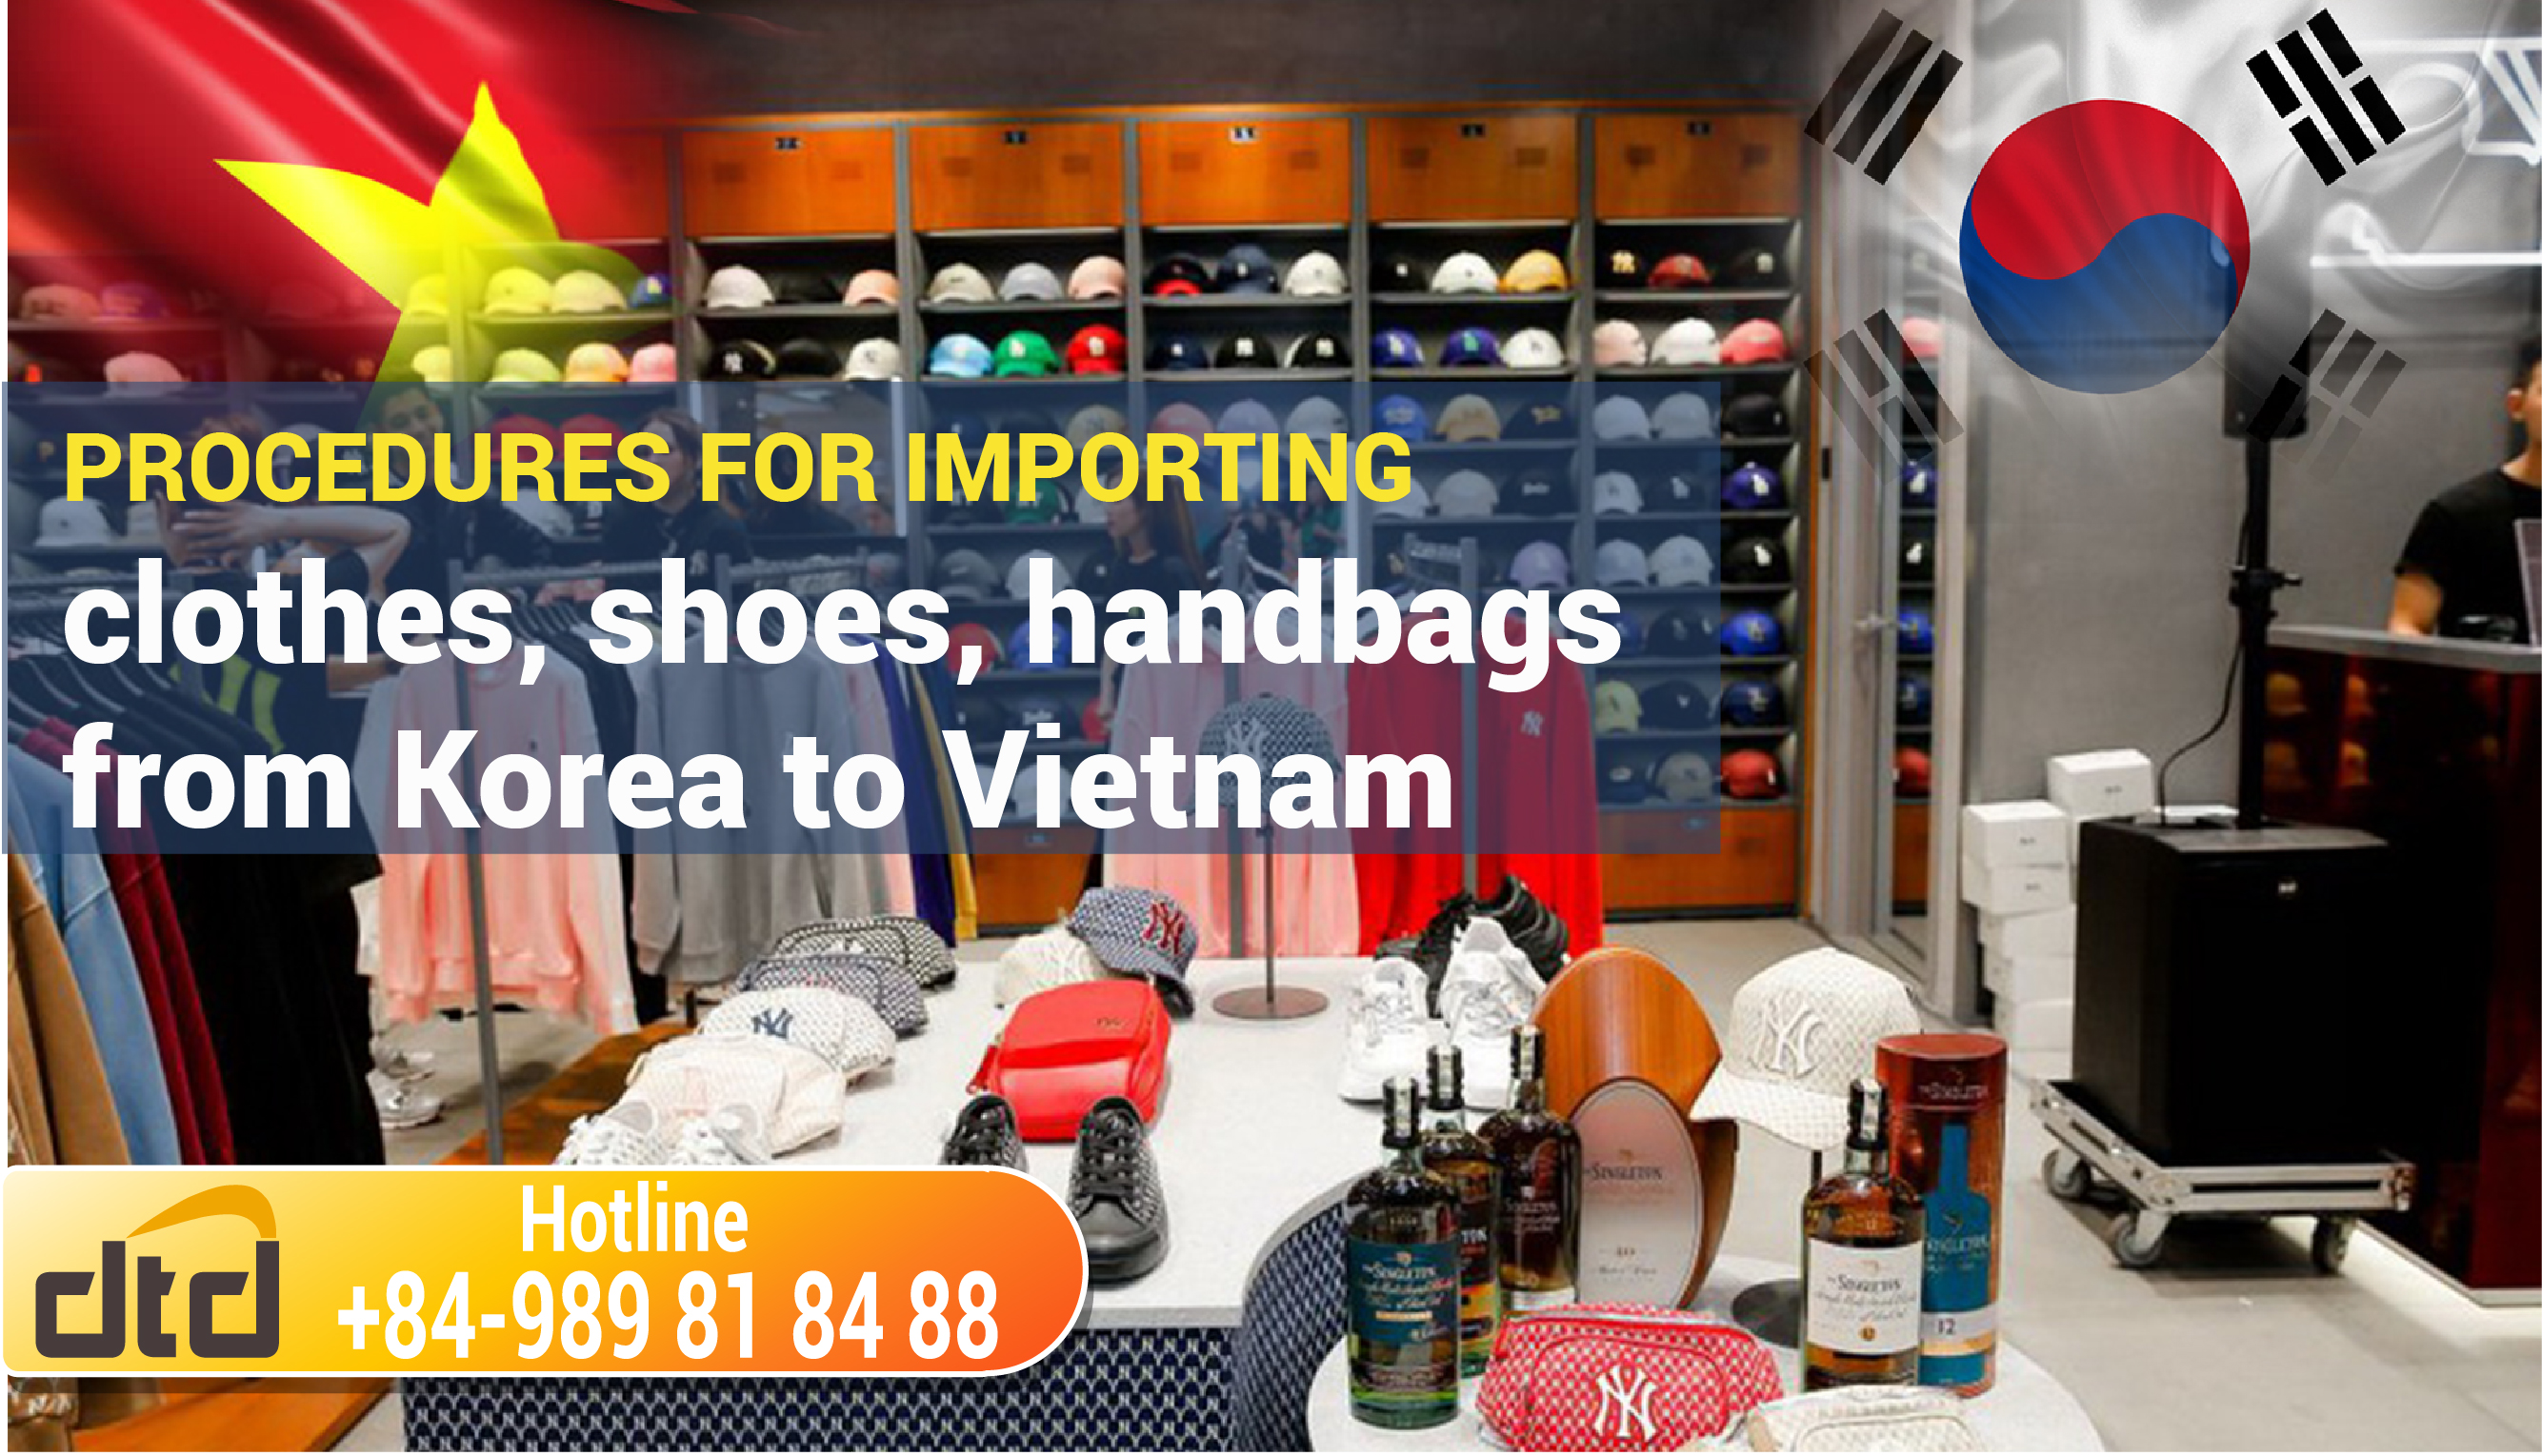 Procedures for importing clothes, shoes, handbags from Korea to Vietnam